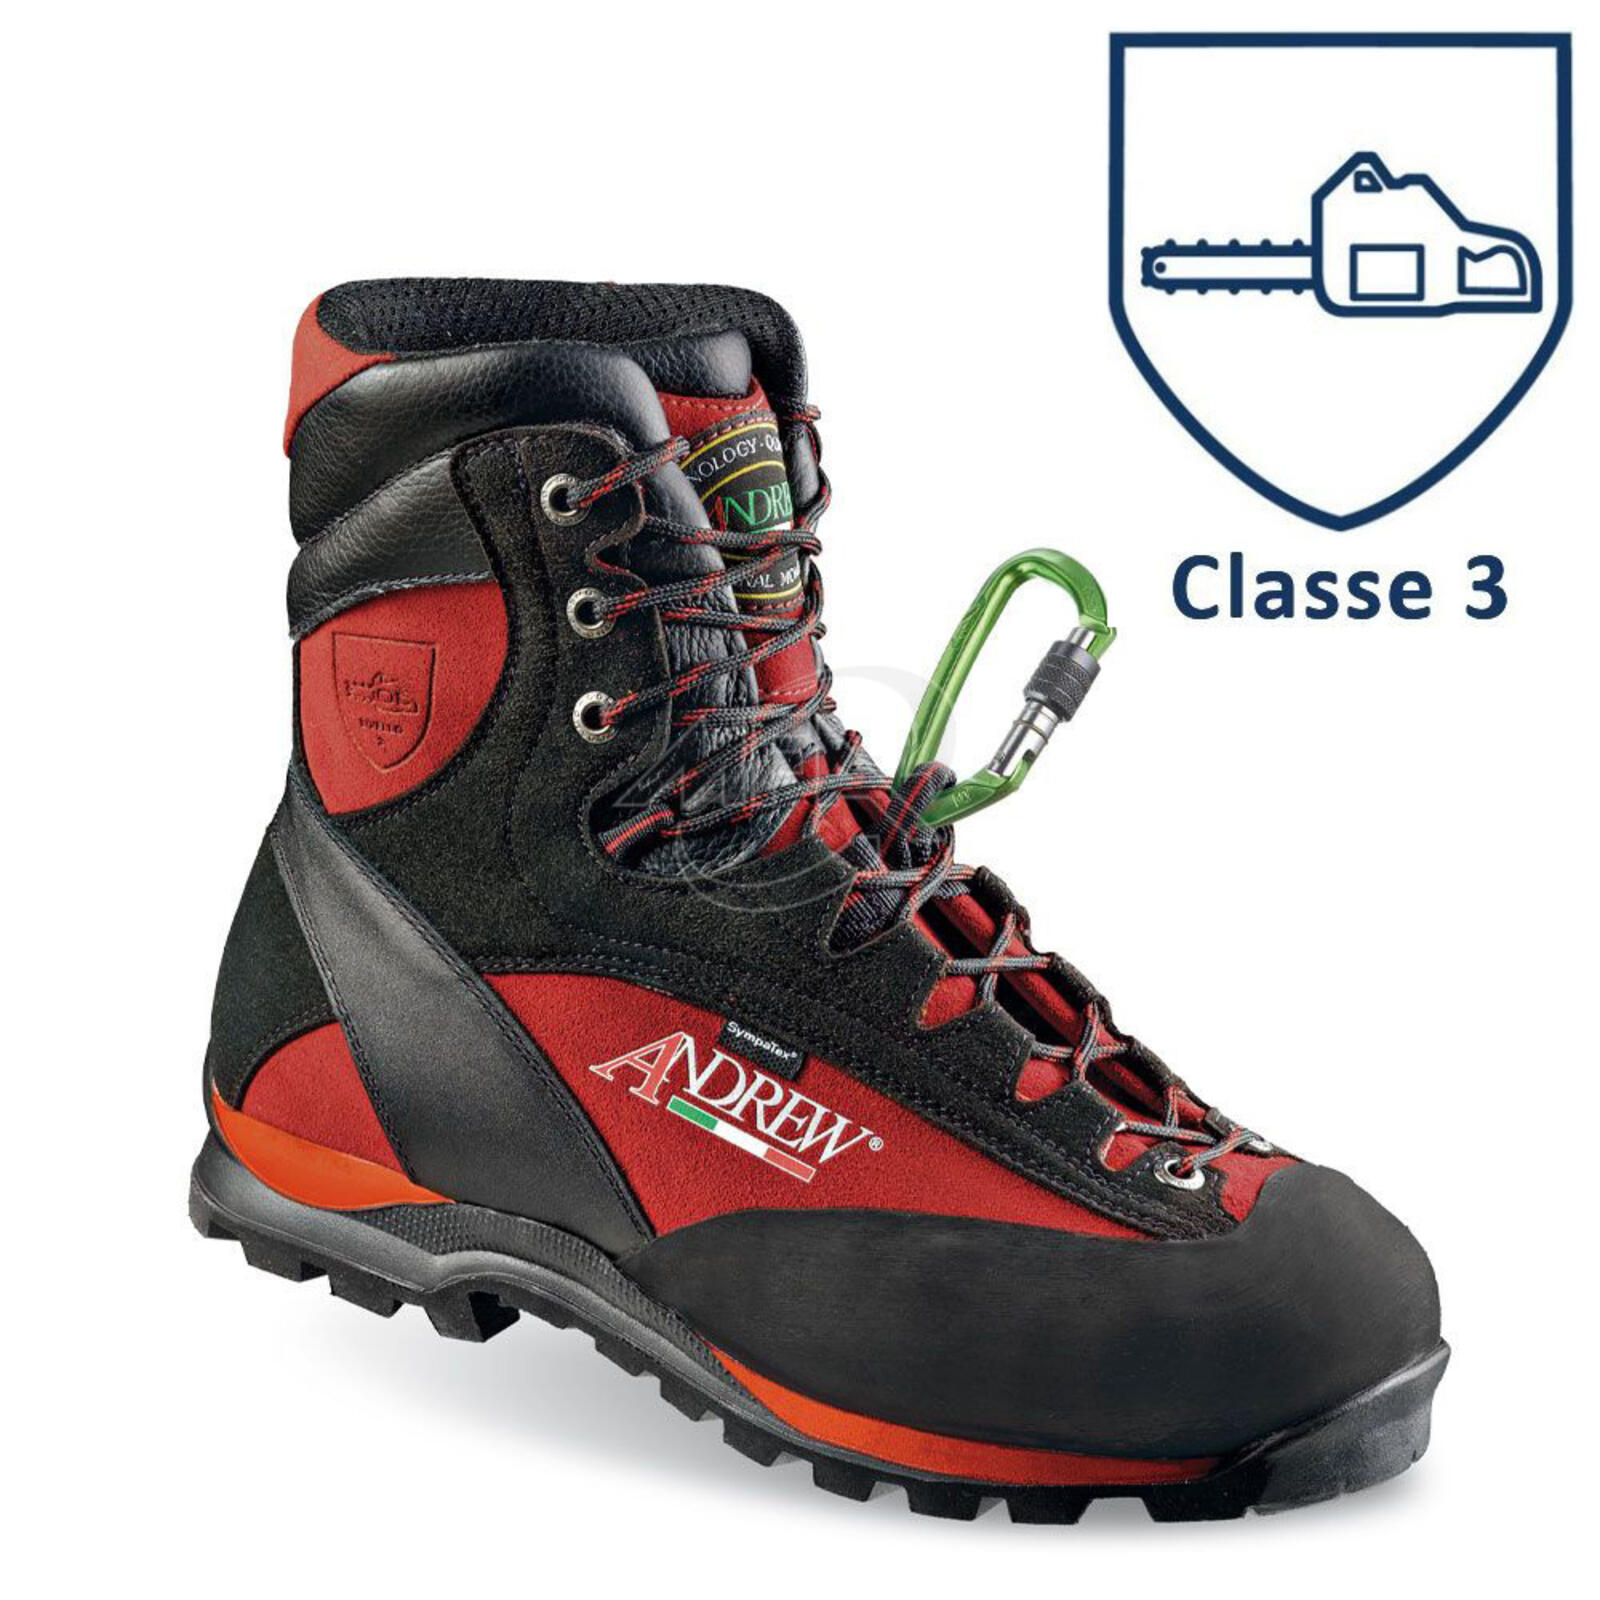 Chaussures Andrew d'élagage Tree Climbing Wood de protection classe 3